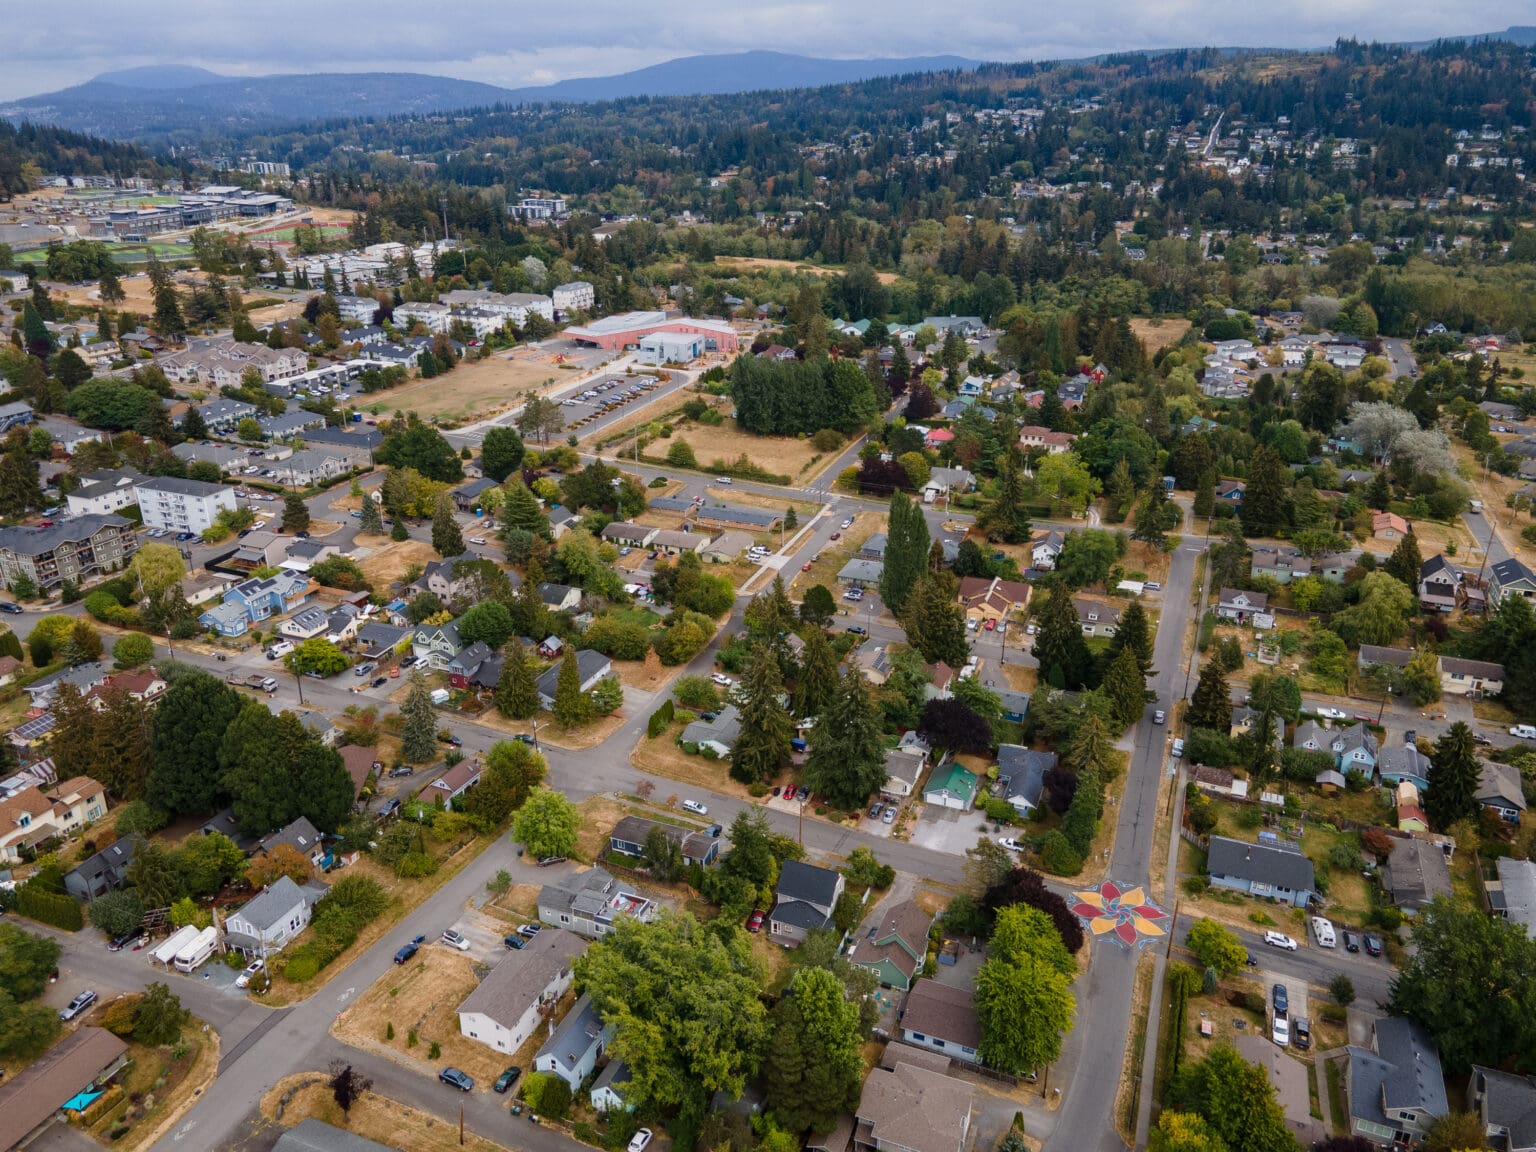 An aerial view of Happy Valley and other Bellingham neighborhoods surrounding the town.